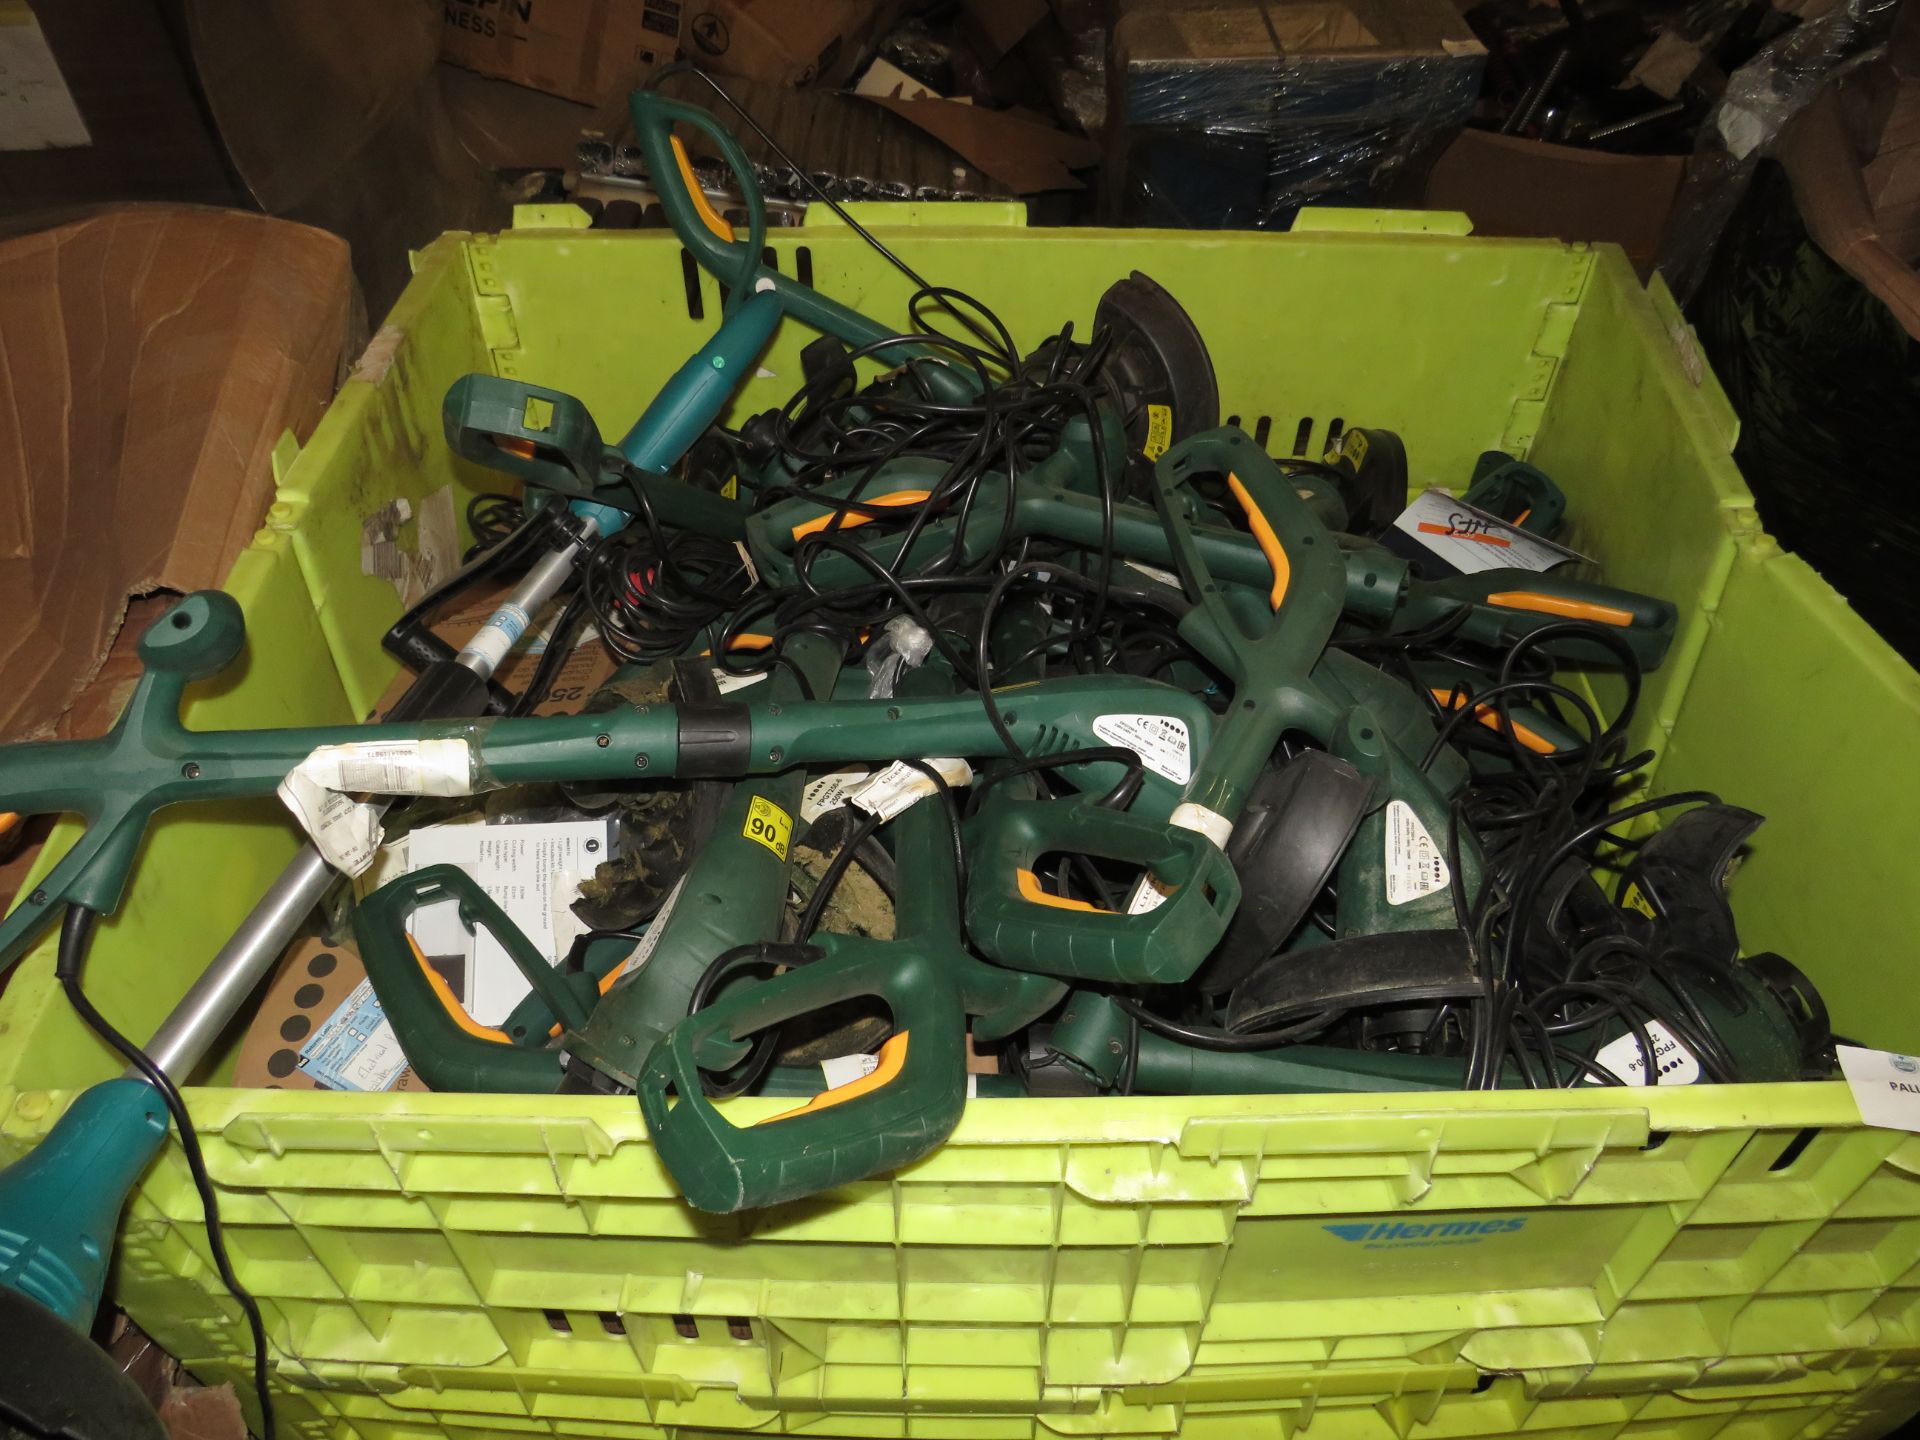 1x pallet containing Approx 40 + Returned Unbranded 250w Corded Electric Grass Trimmers - All Used